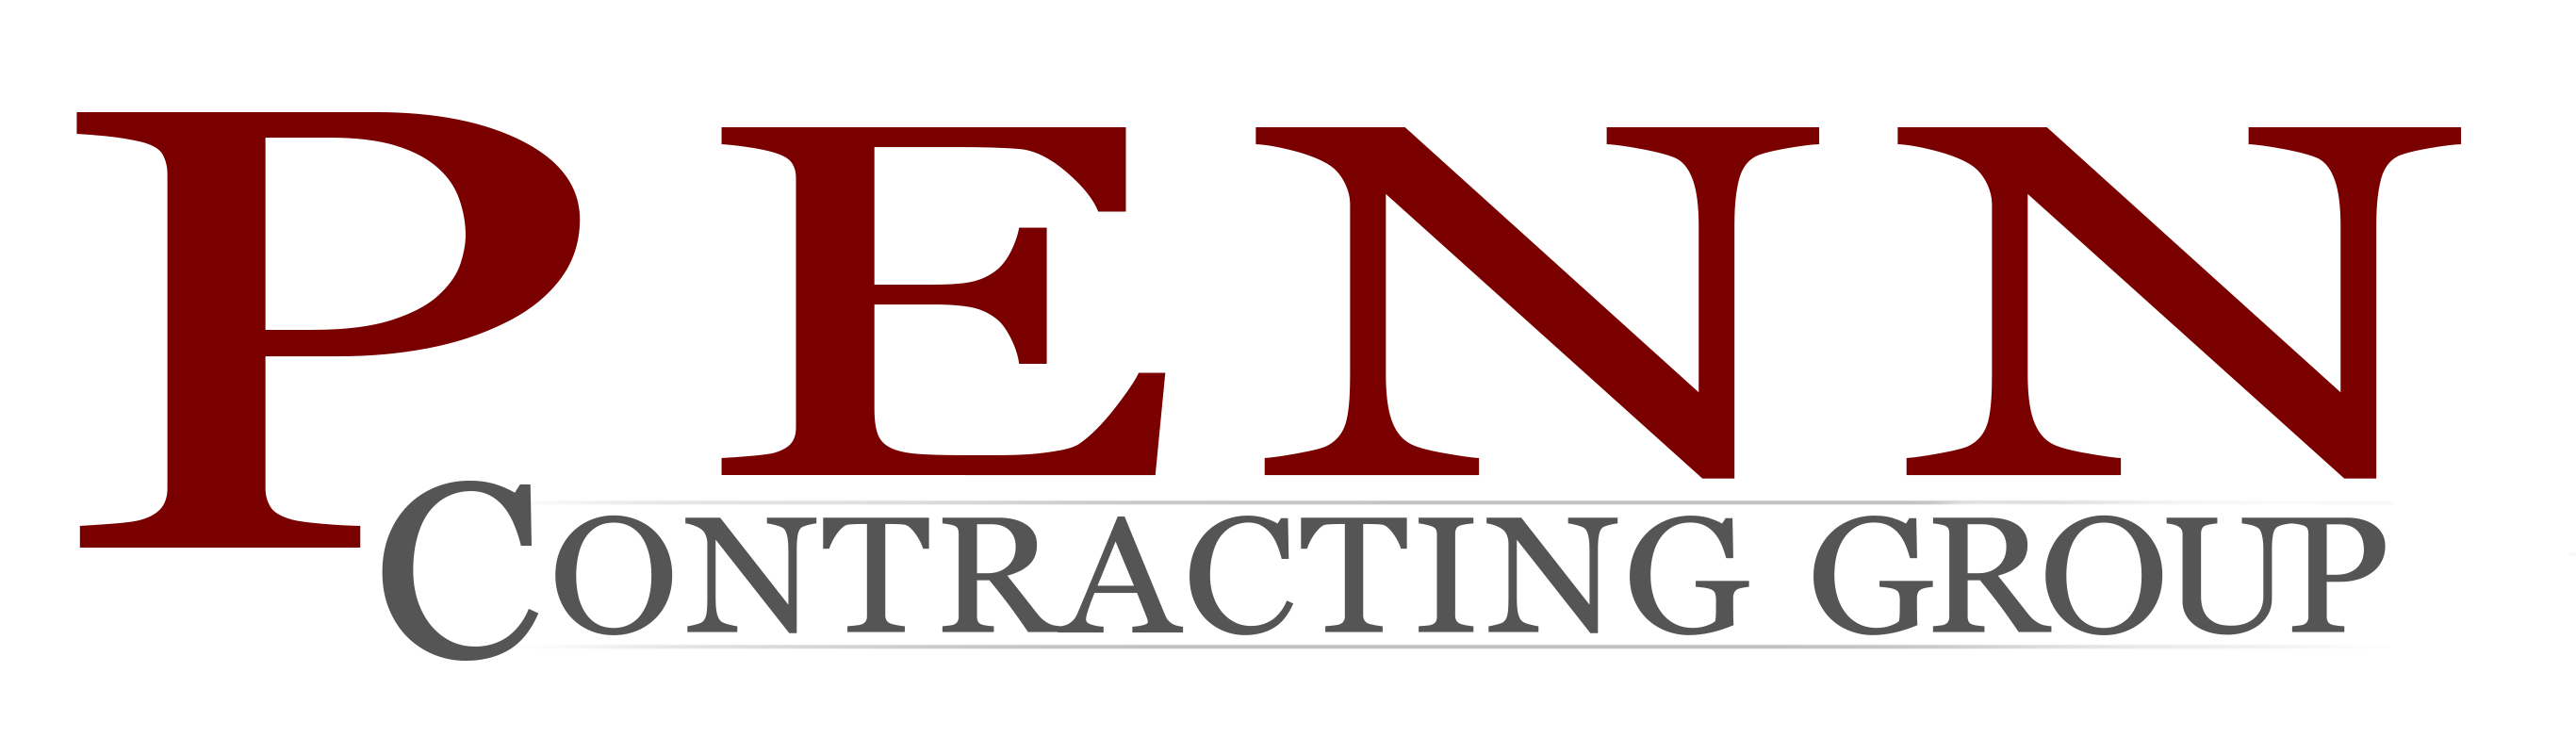 Penn Contracting Group website